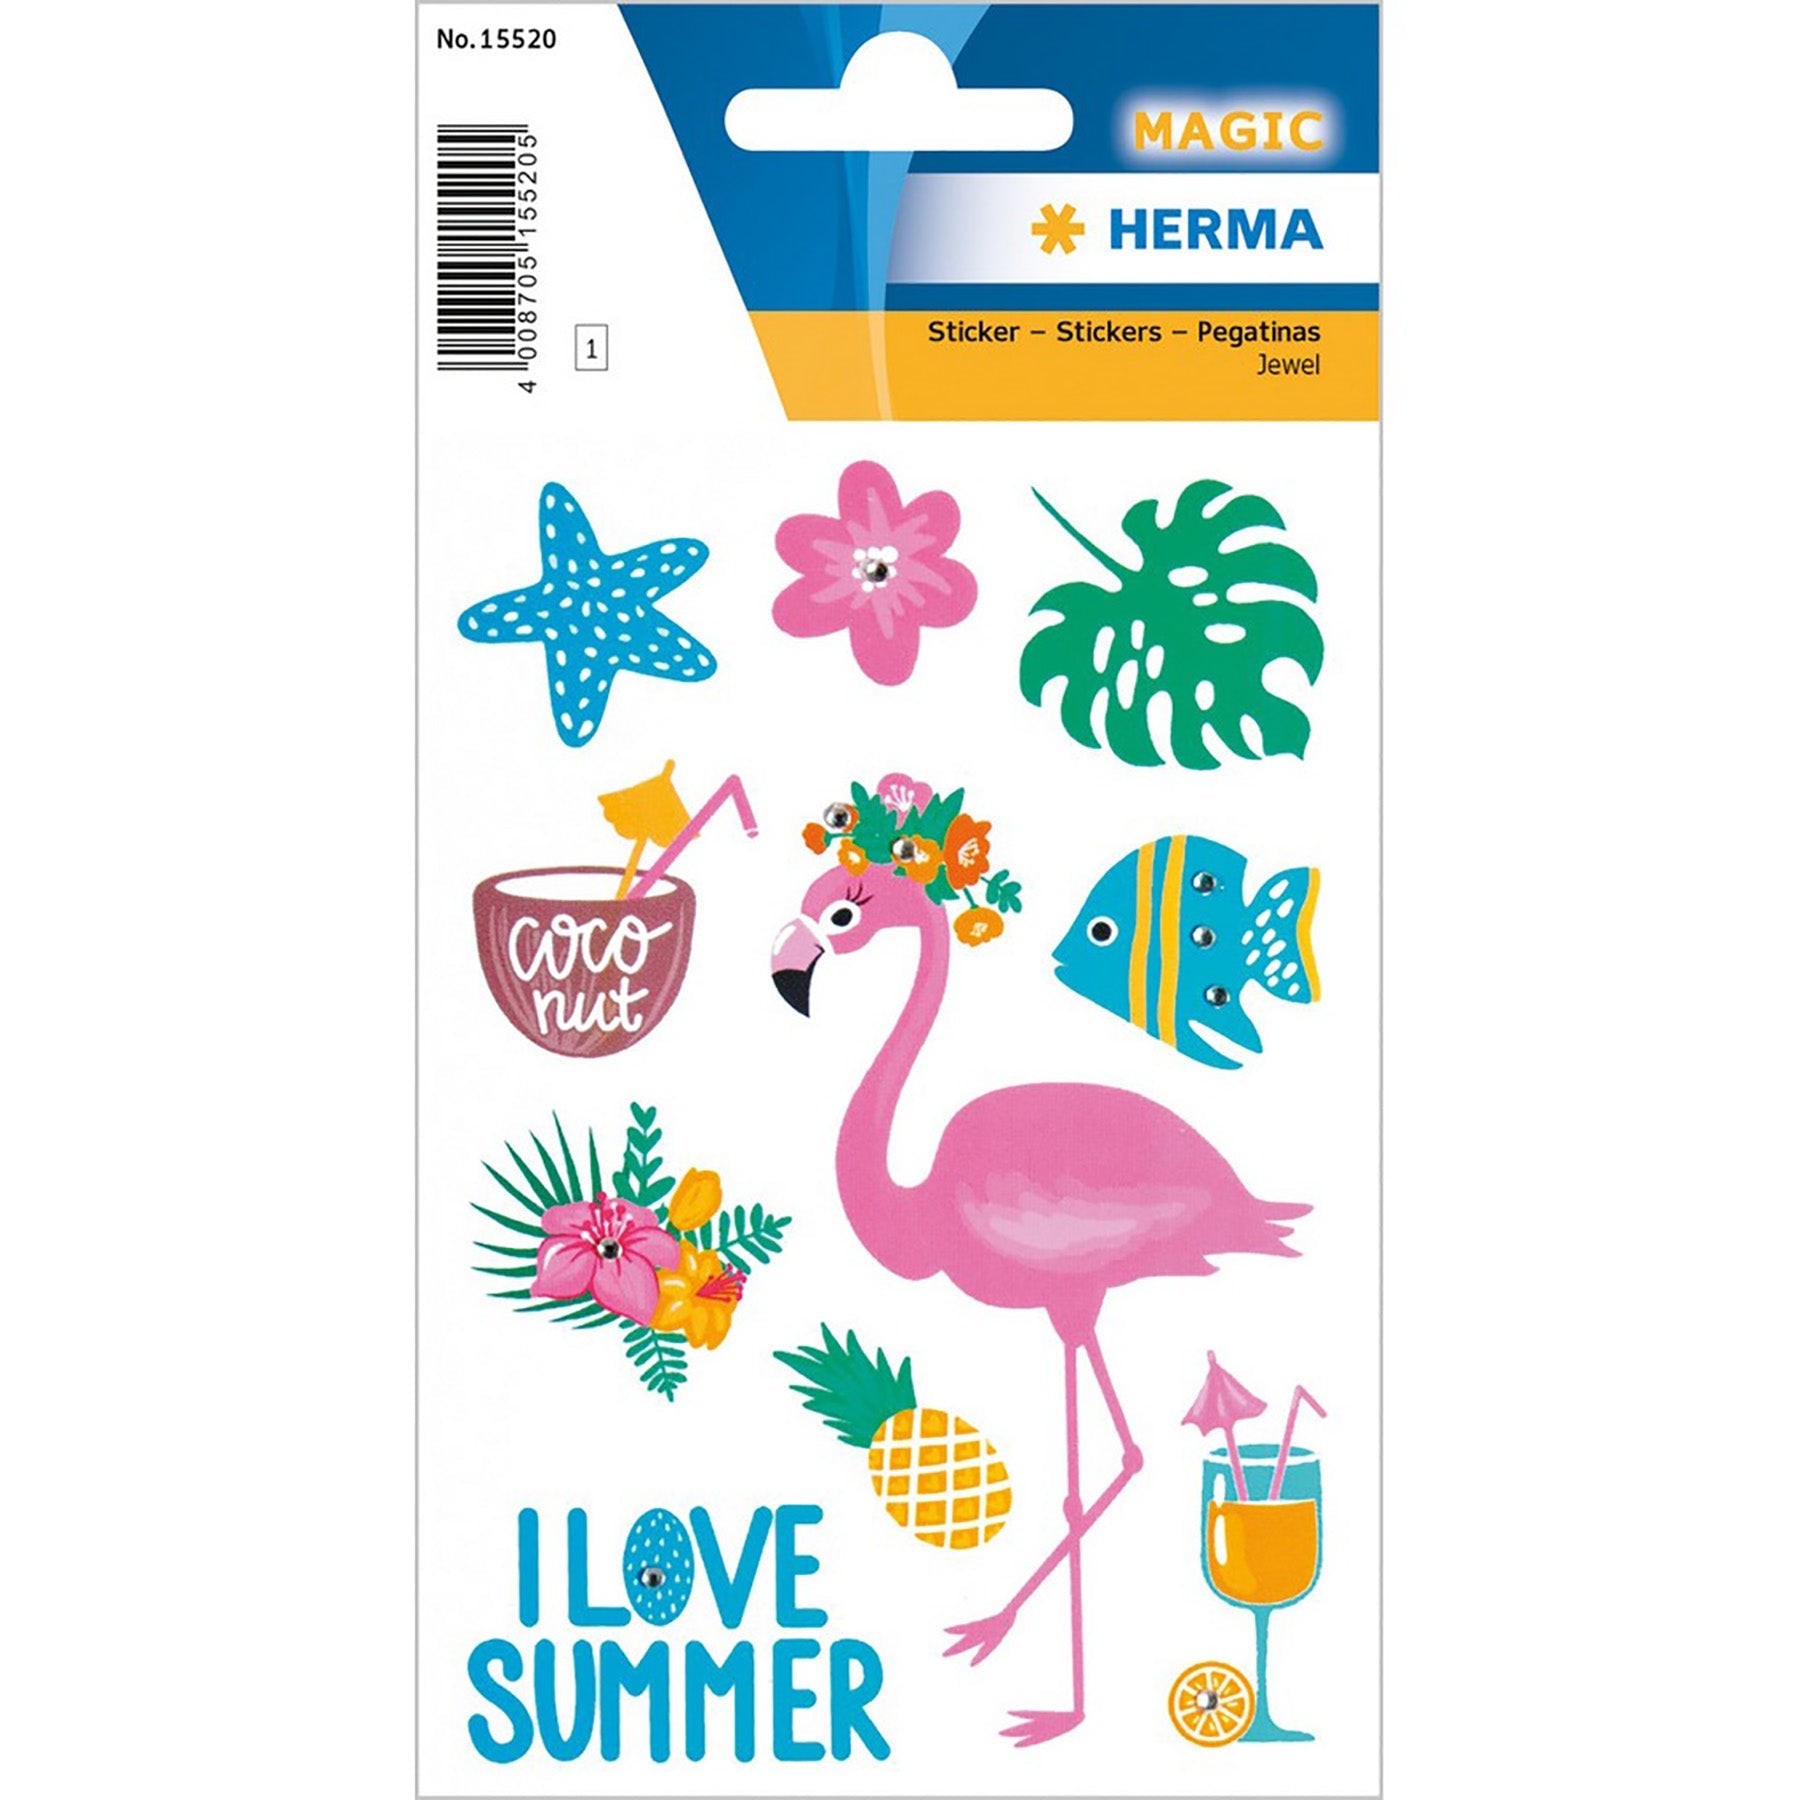 Herma Magic Stickers I Love Summer with Jewel 4.75x3.1in Sheet